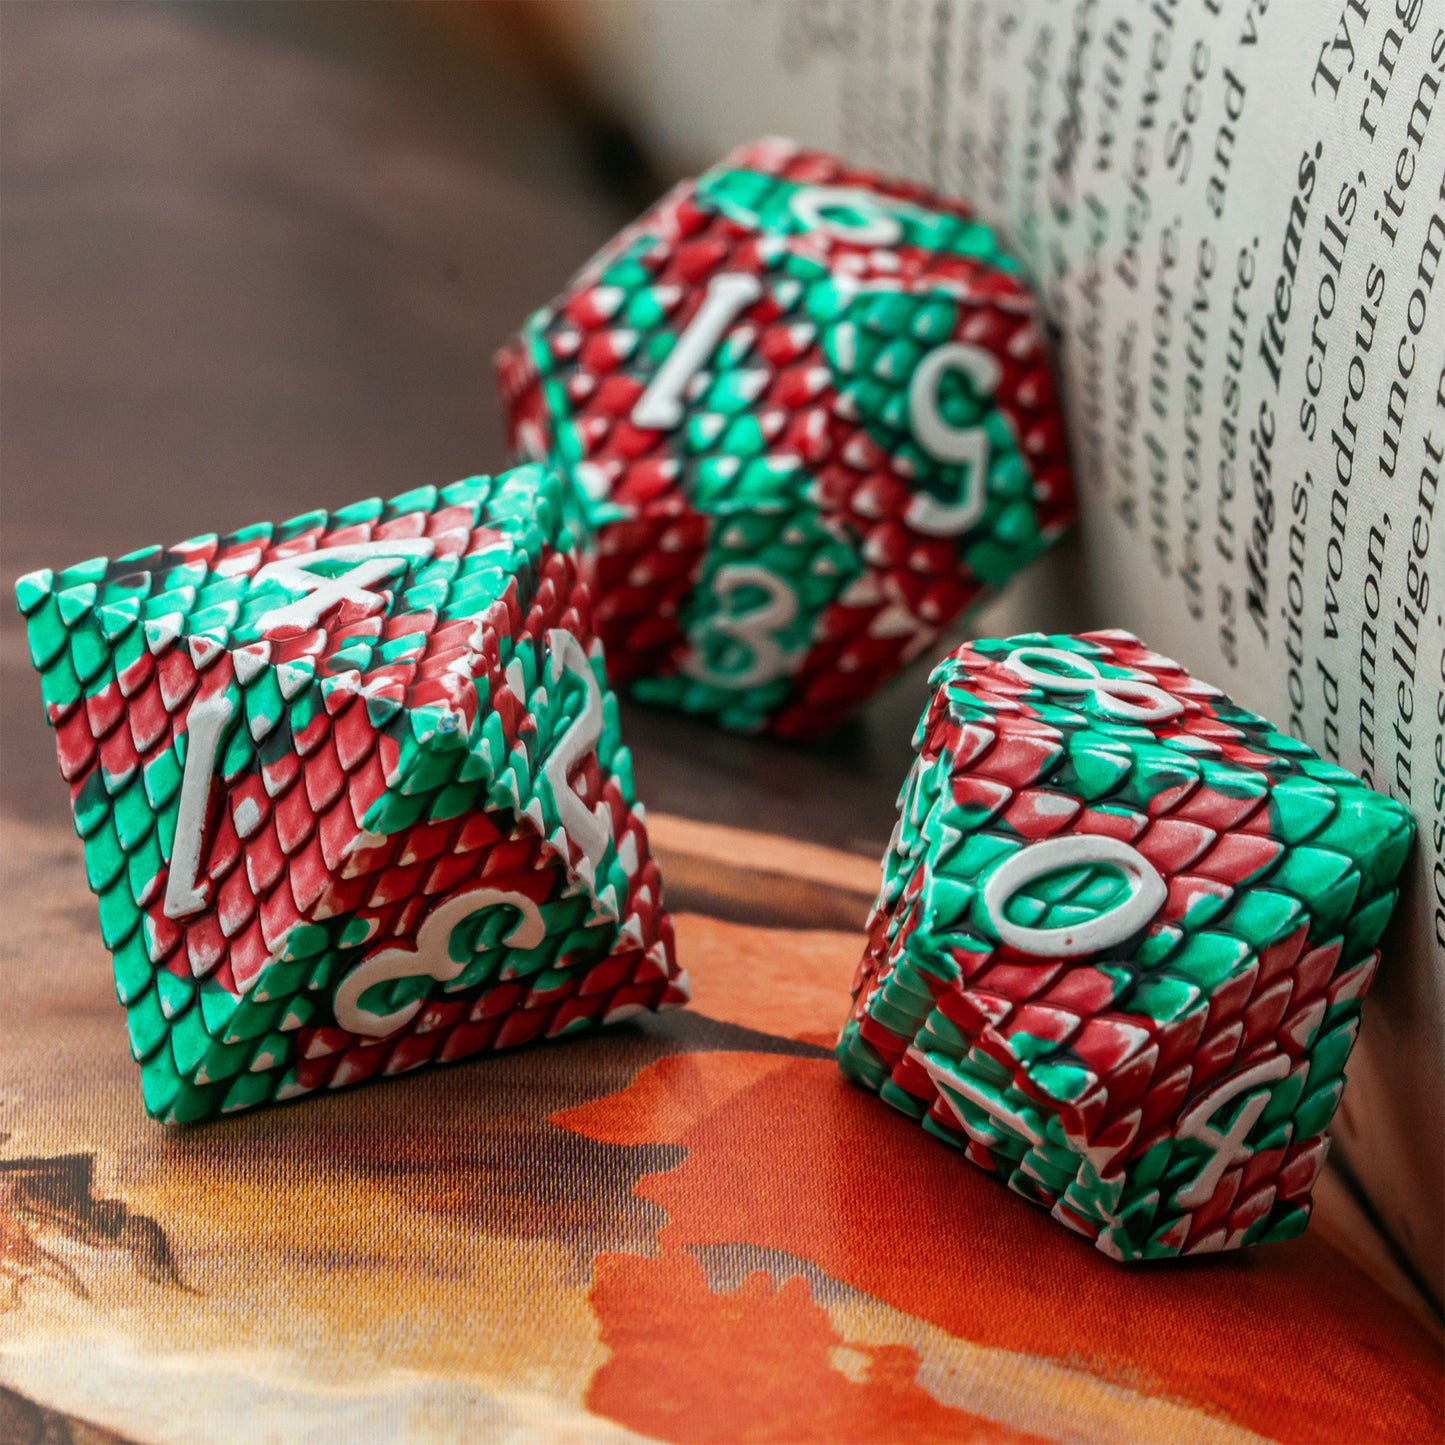 green red and white dice between pages